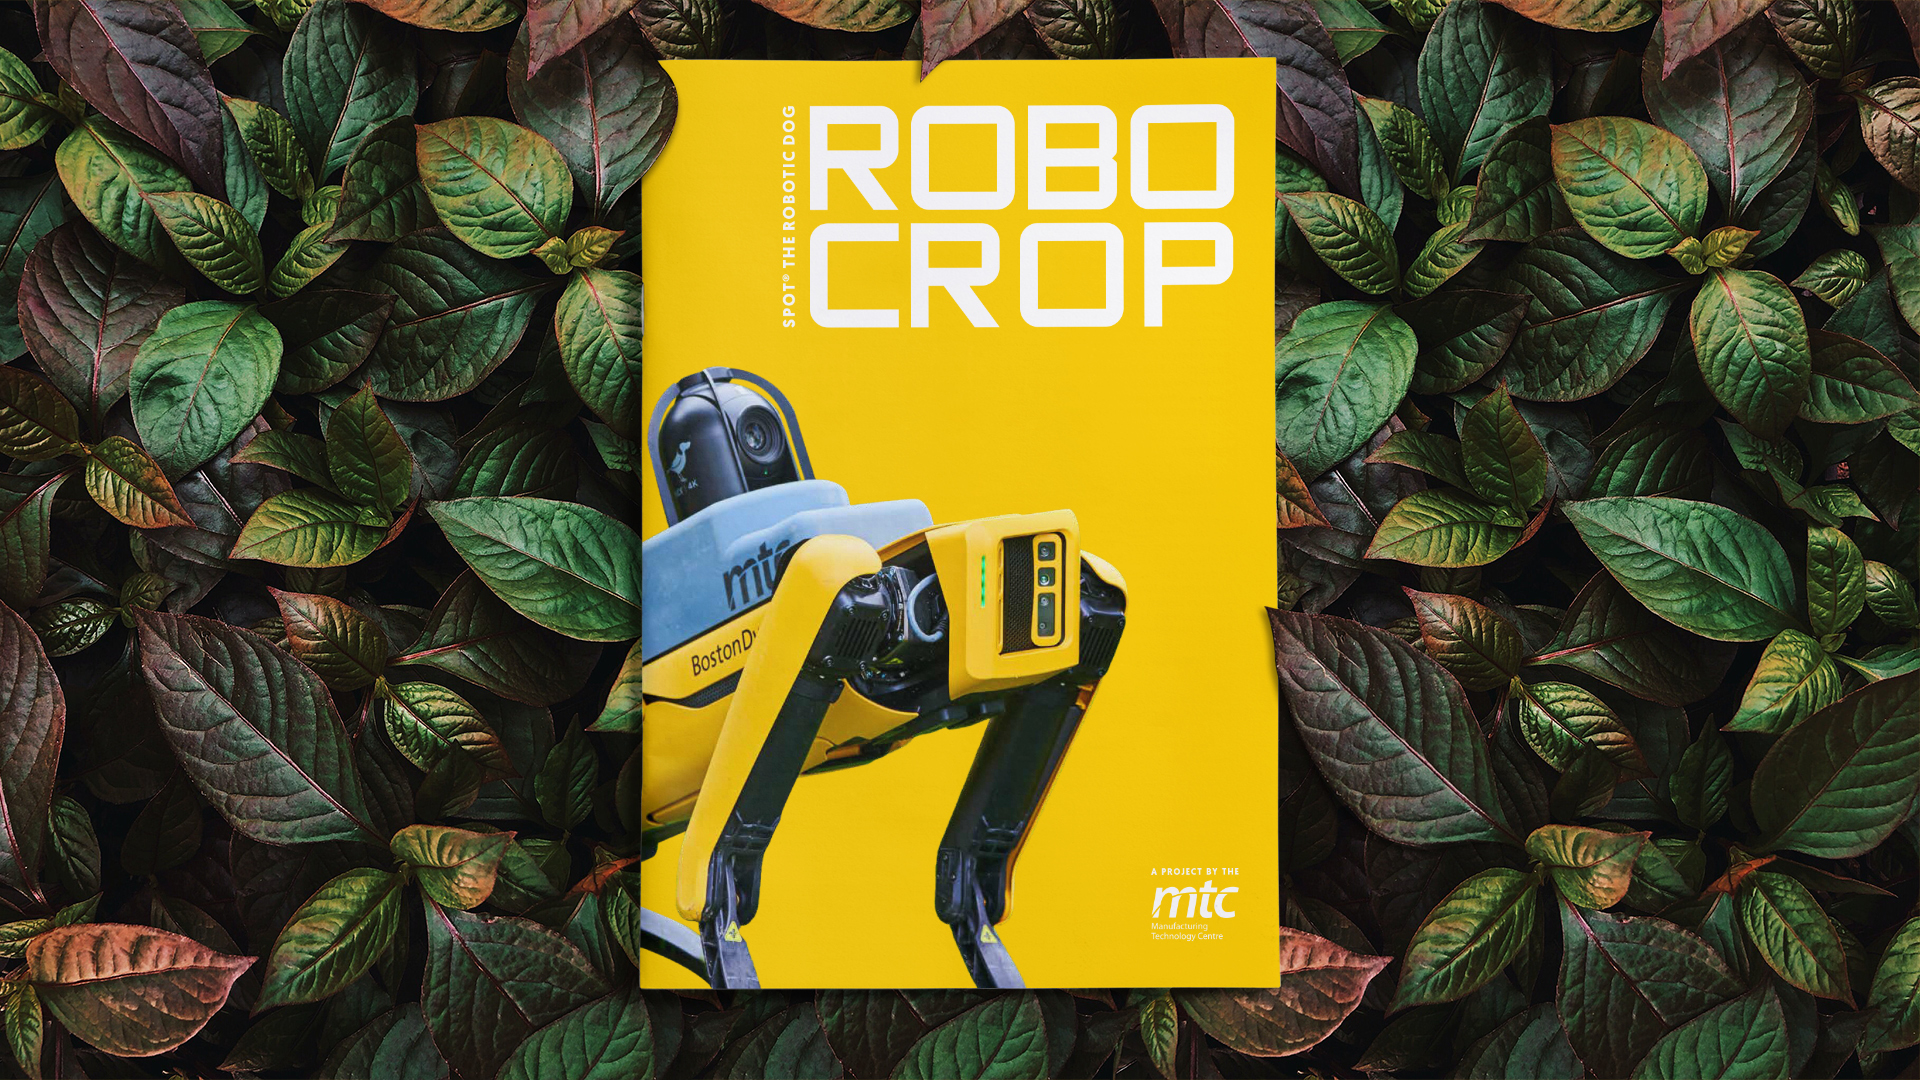 MTC Robocrop project wows